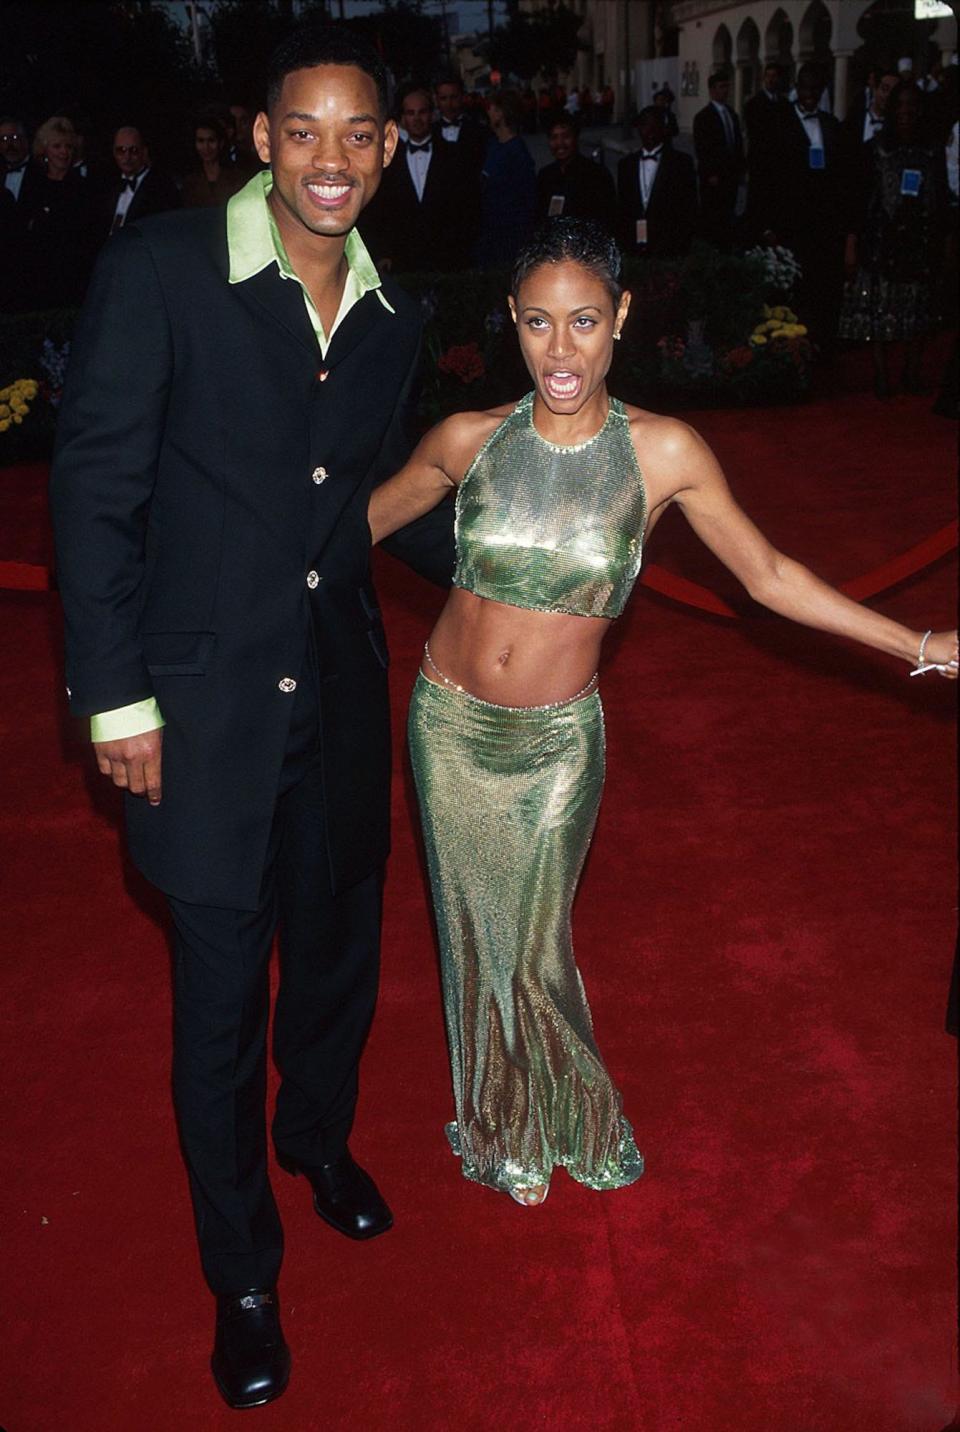 Will and Jada Pinkett Smith at the Oscars on March 23, 1997.